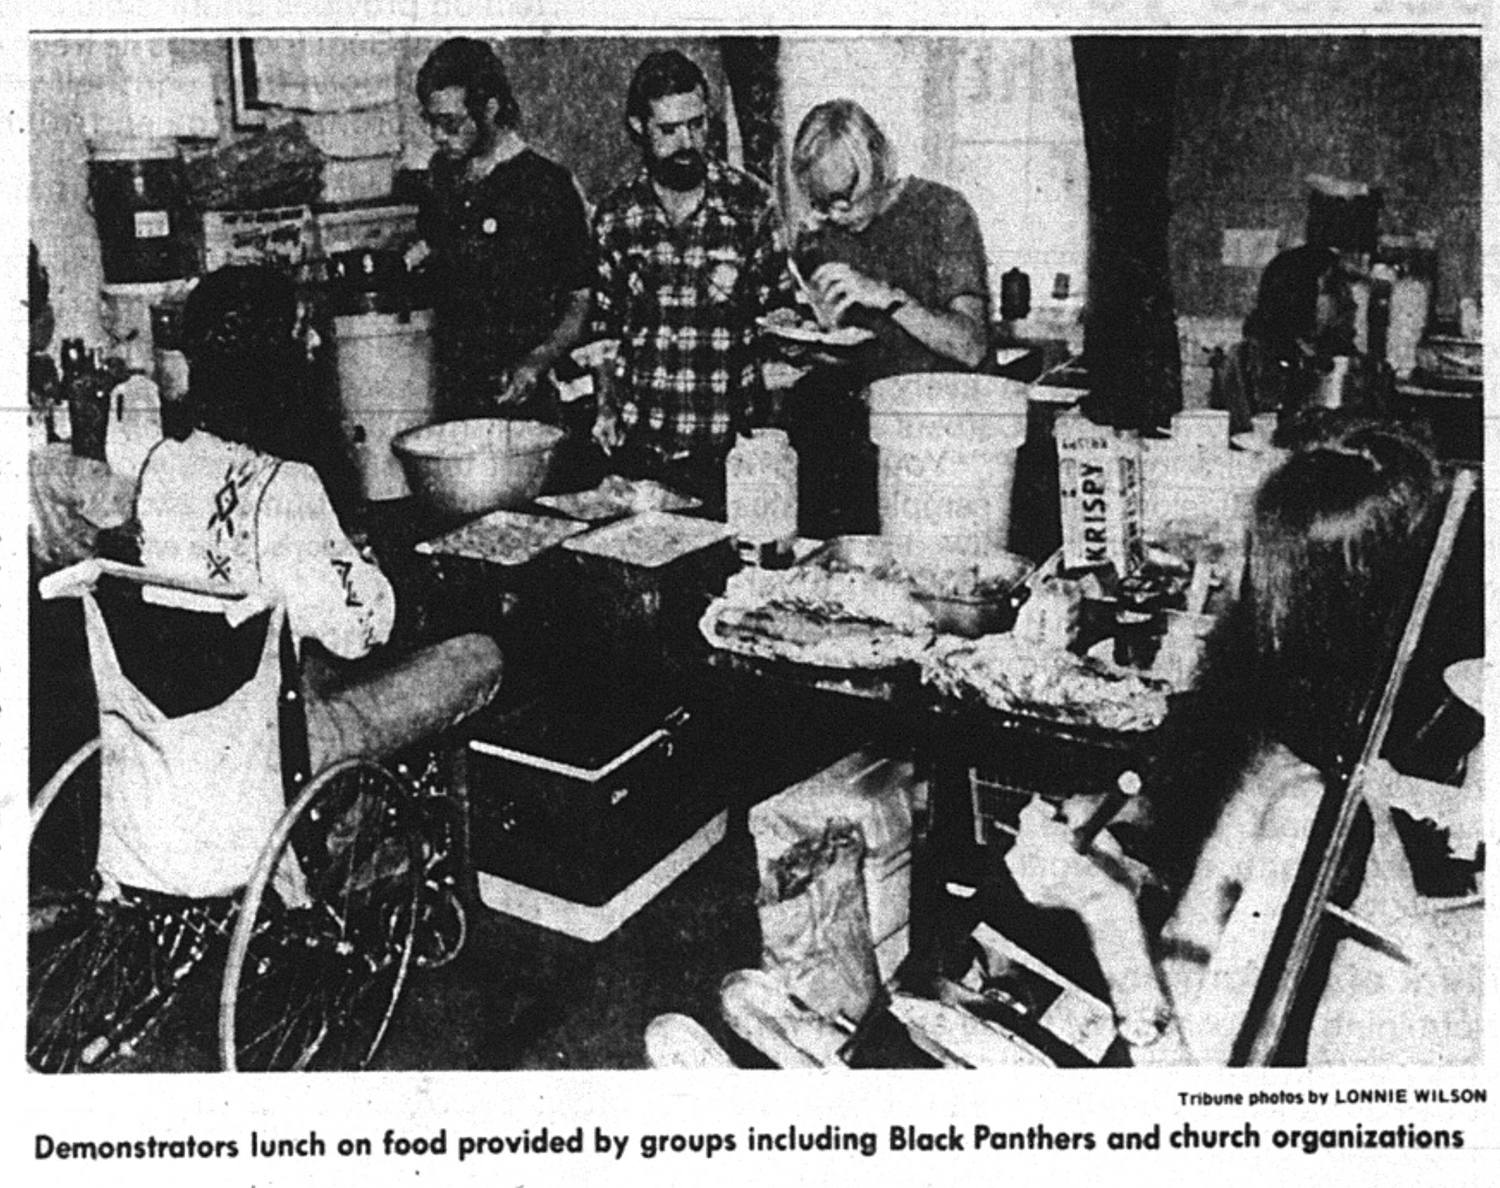 This newspaper clipping shows supplies donated by groups